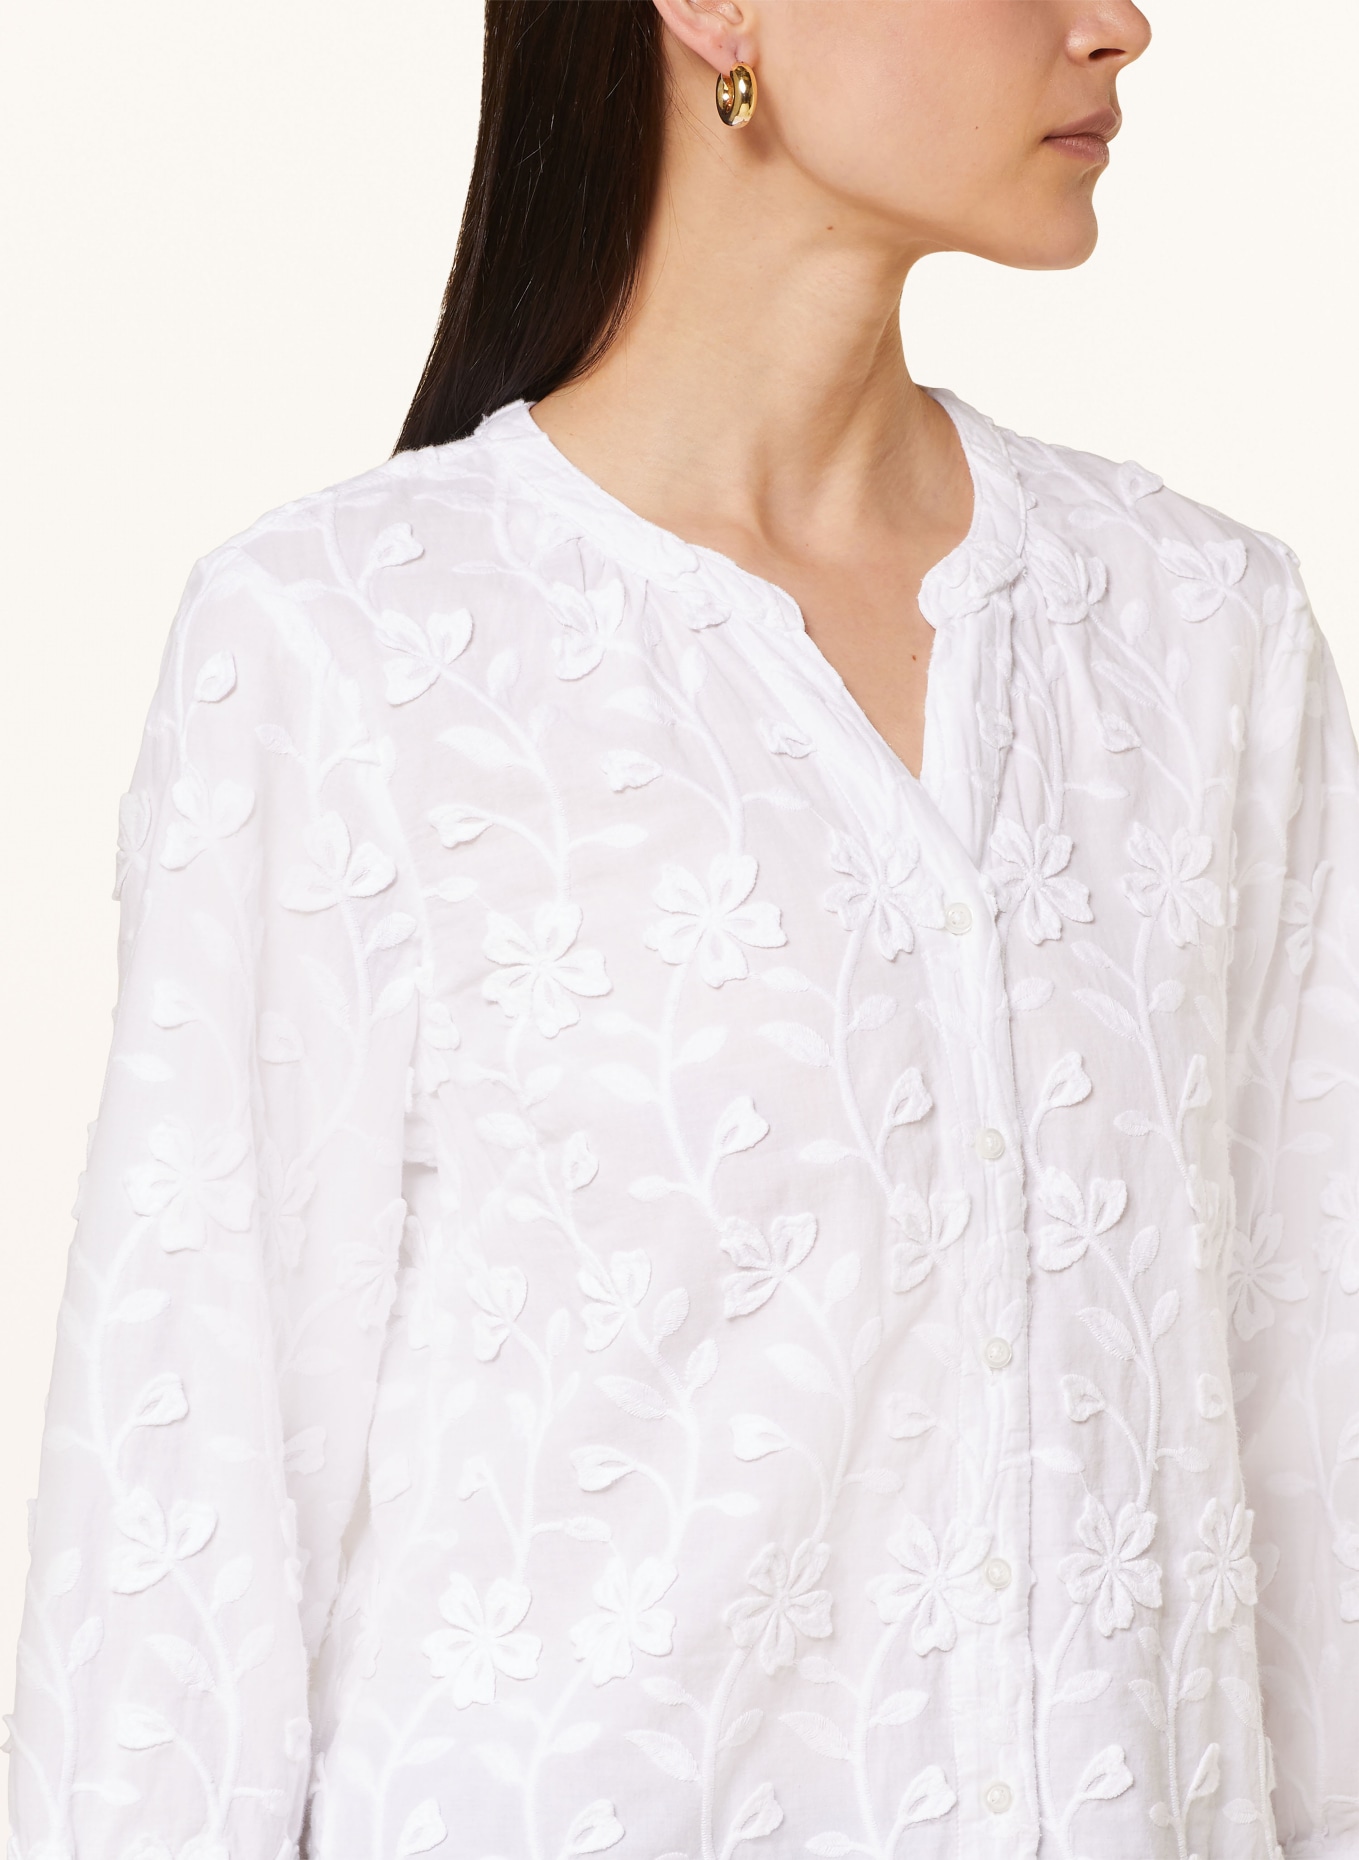 BRAX Shirt blouse VELIA with 3/4 sleeves, Color: WHITE (Image 4)